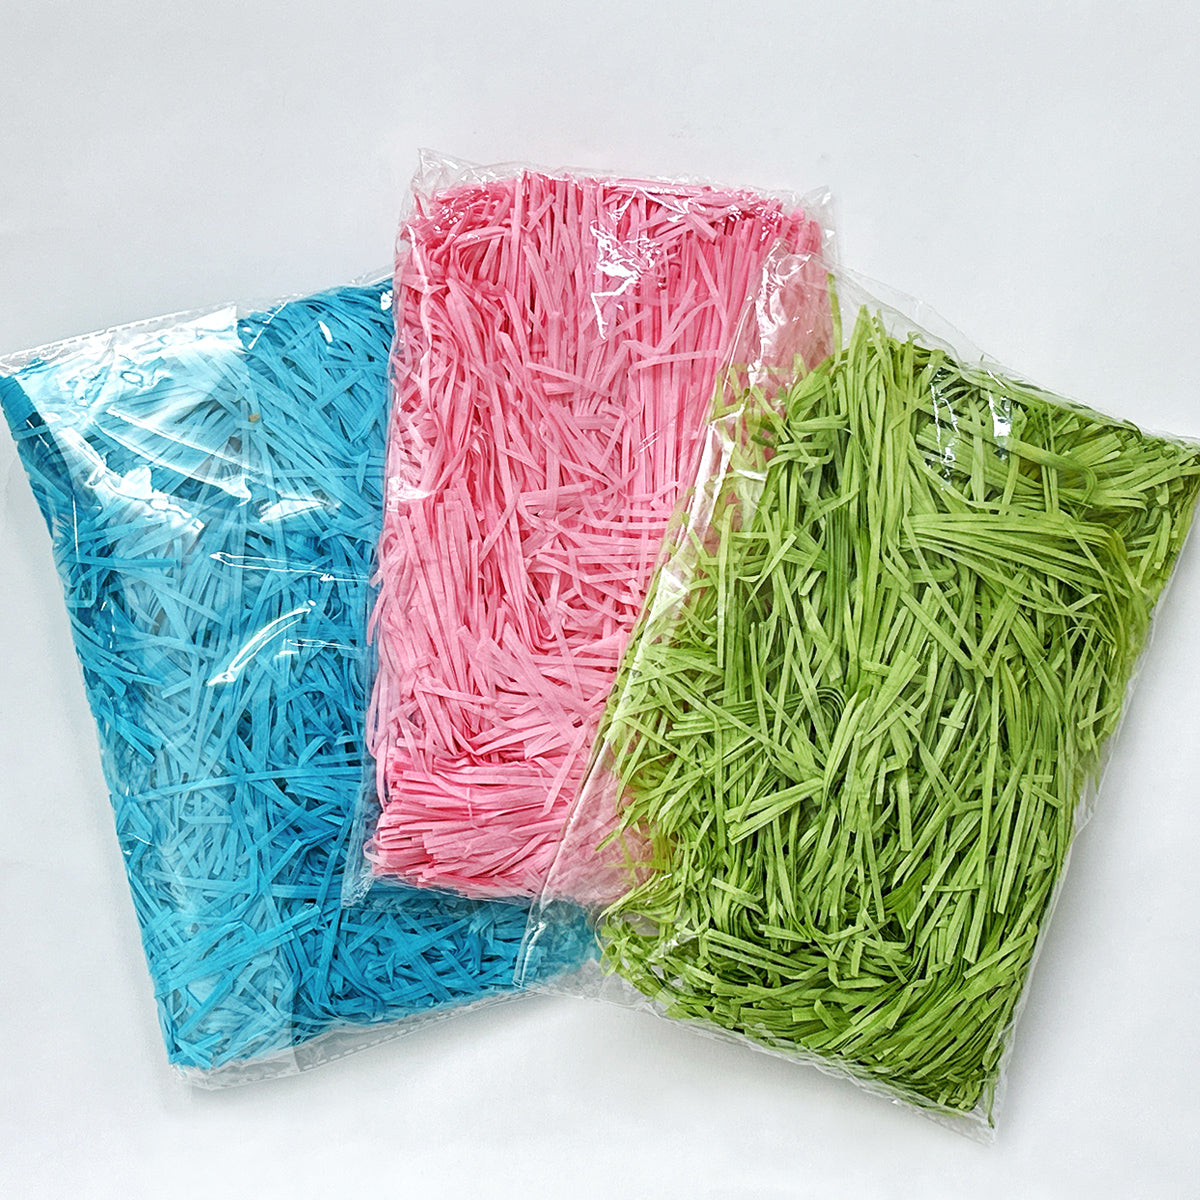 Wrapables Easter Grass Package Filler, Shredded Paper for Gift Wrapping, Basket Filling, Packing (Set of 3)